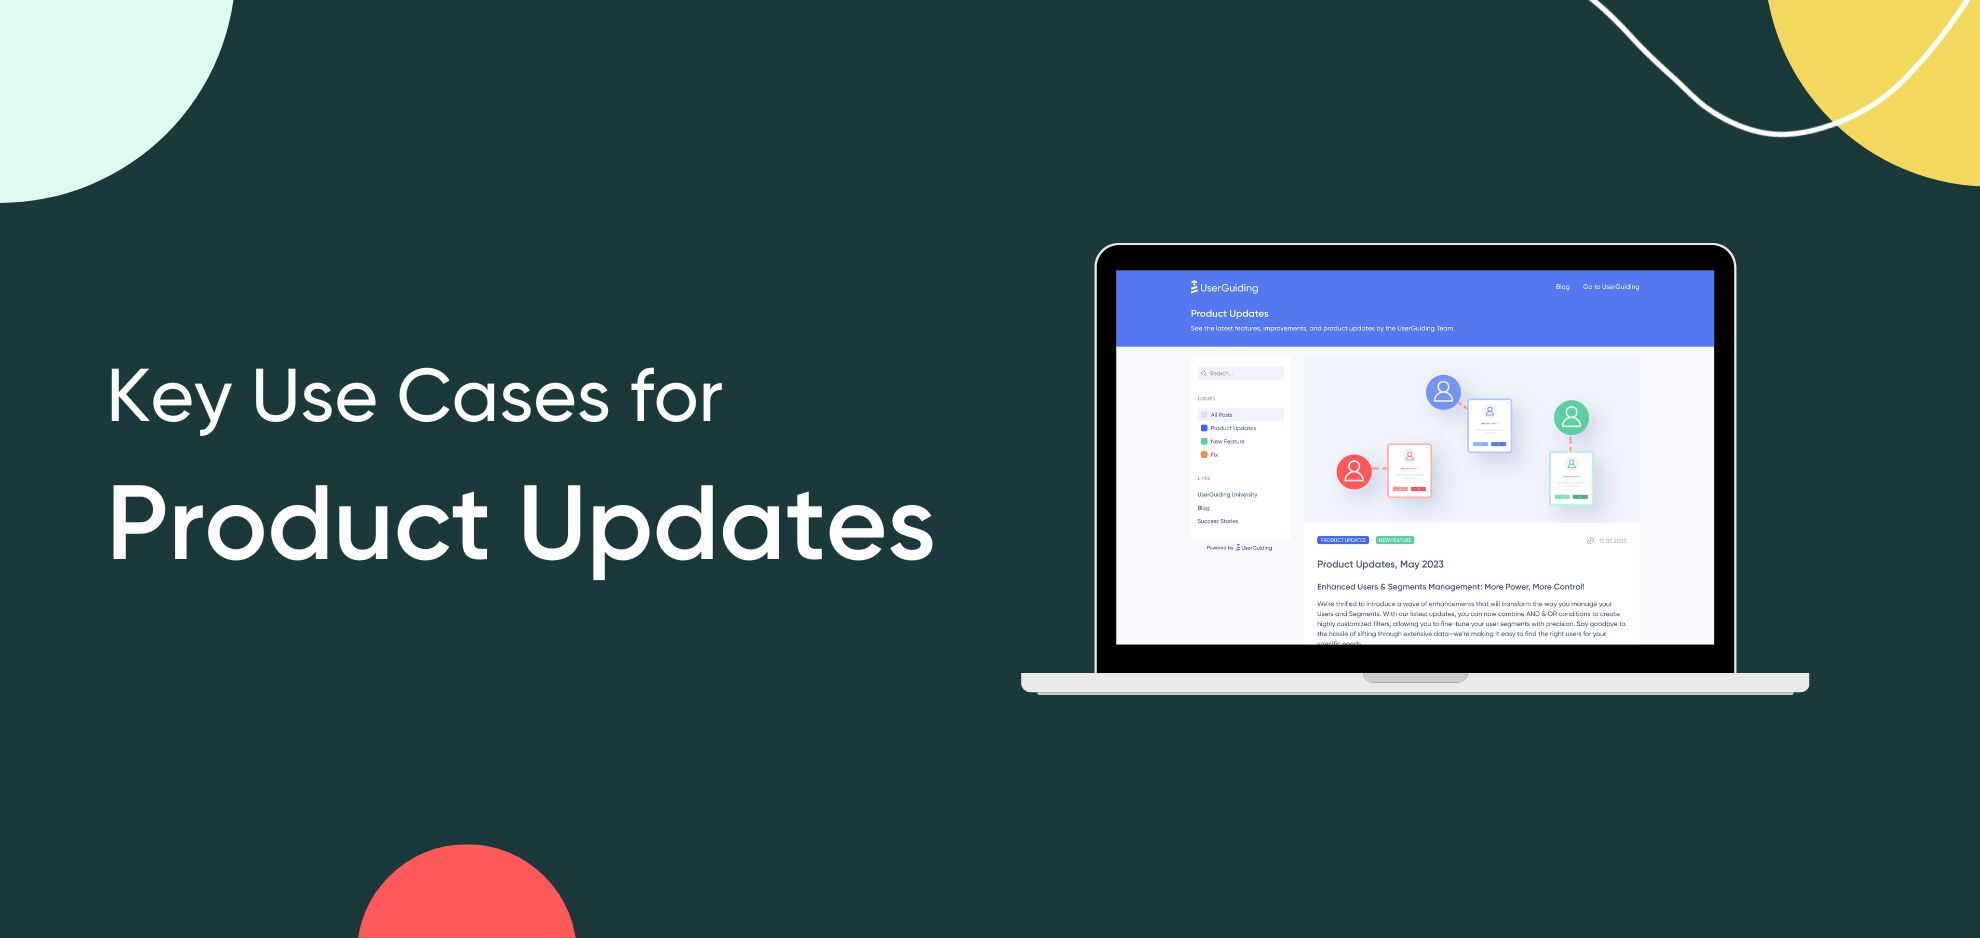 4 Key Use Cases That Make UserGuiding’s Product Updates a Must-Try